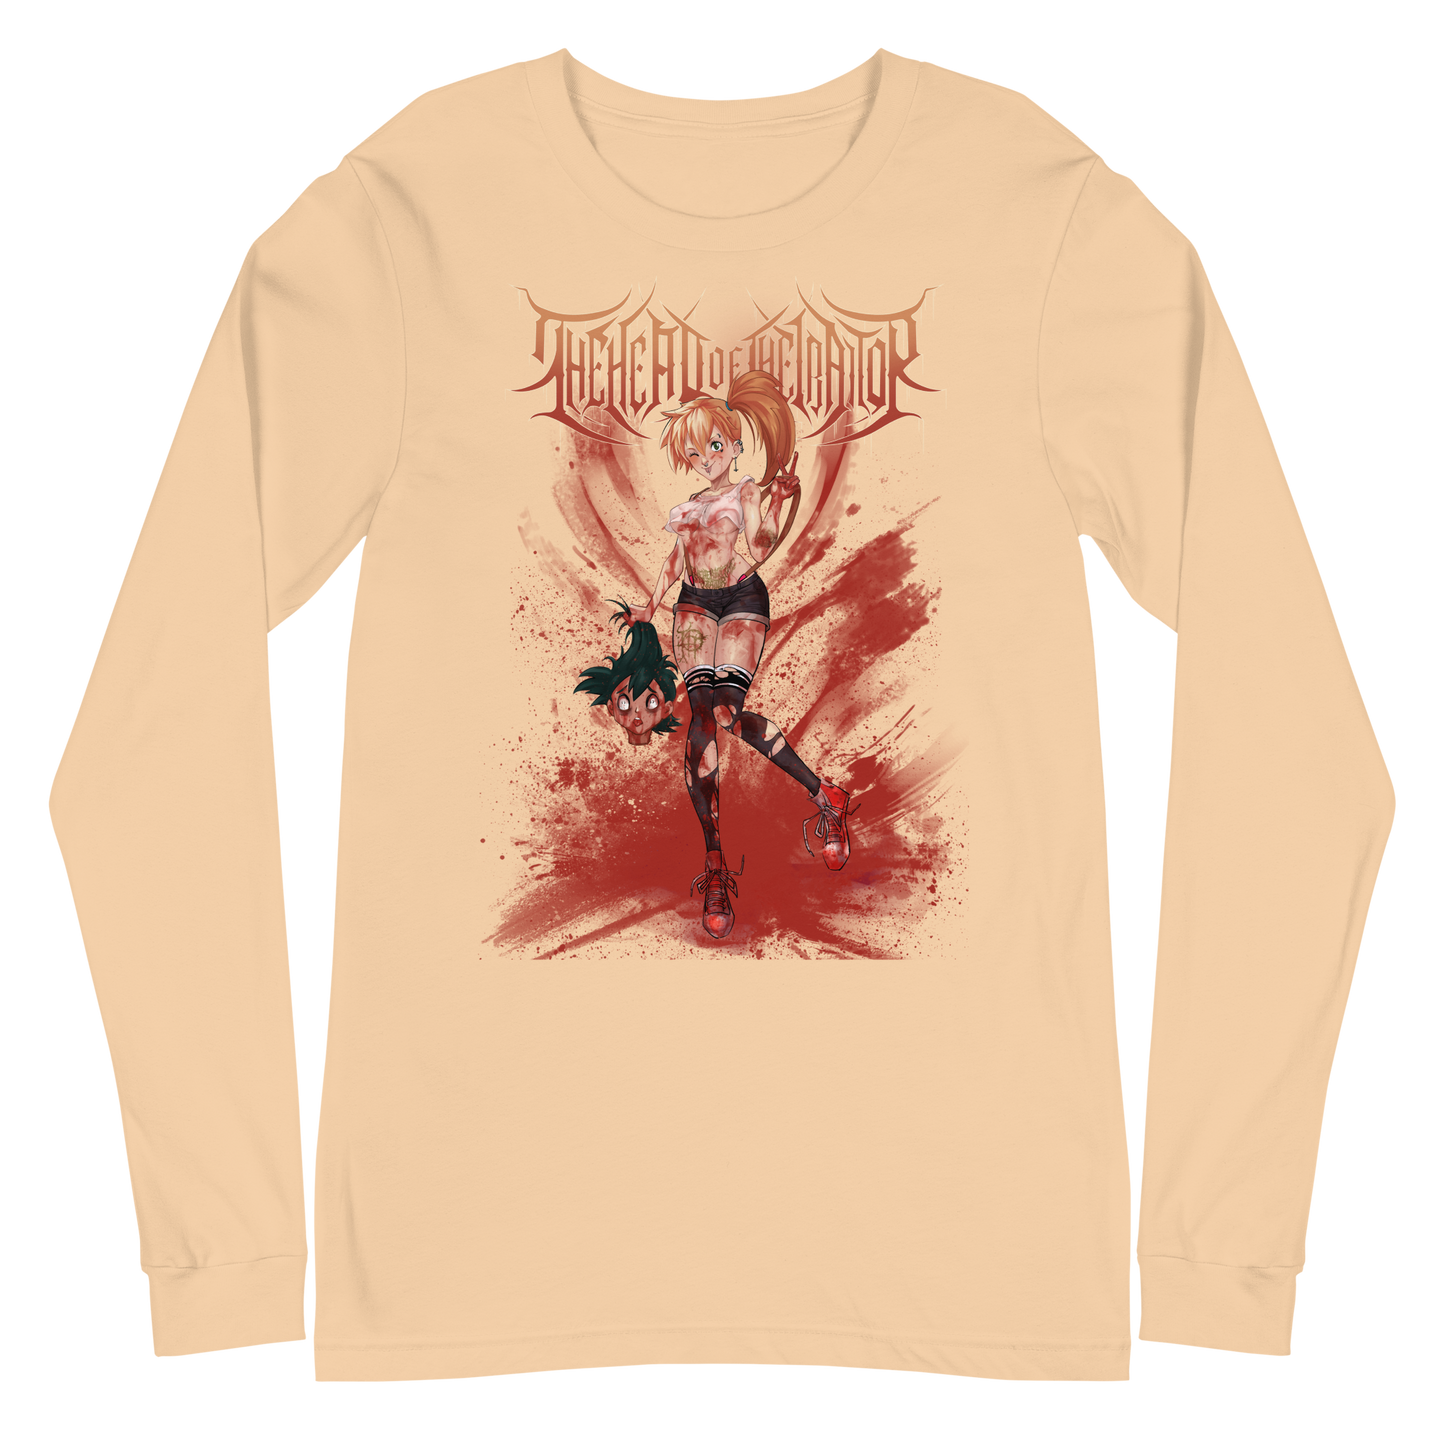 The Head of The Traitor "Bloody Mist" - Unisex Long Sleeve Tee